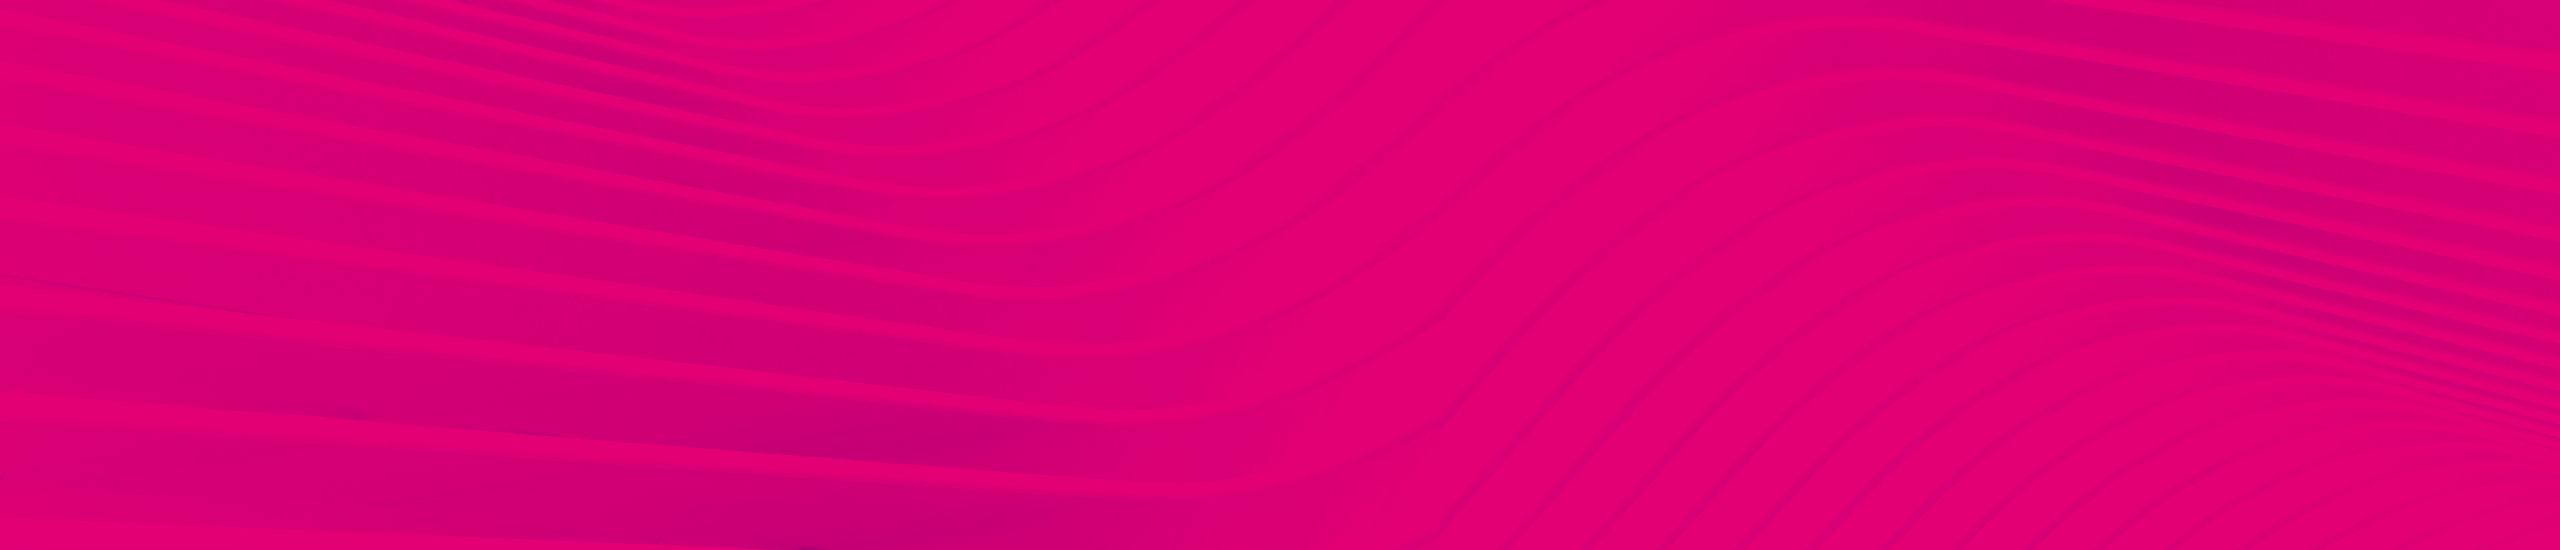 Magenta background white paper: Industrial Security